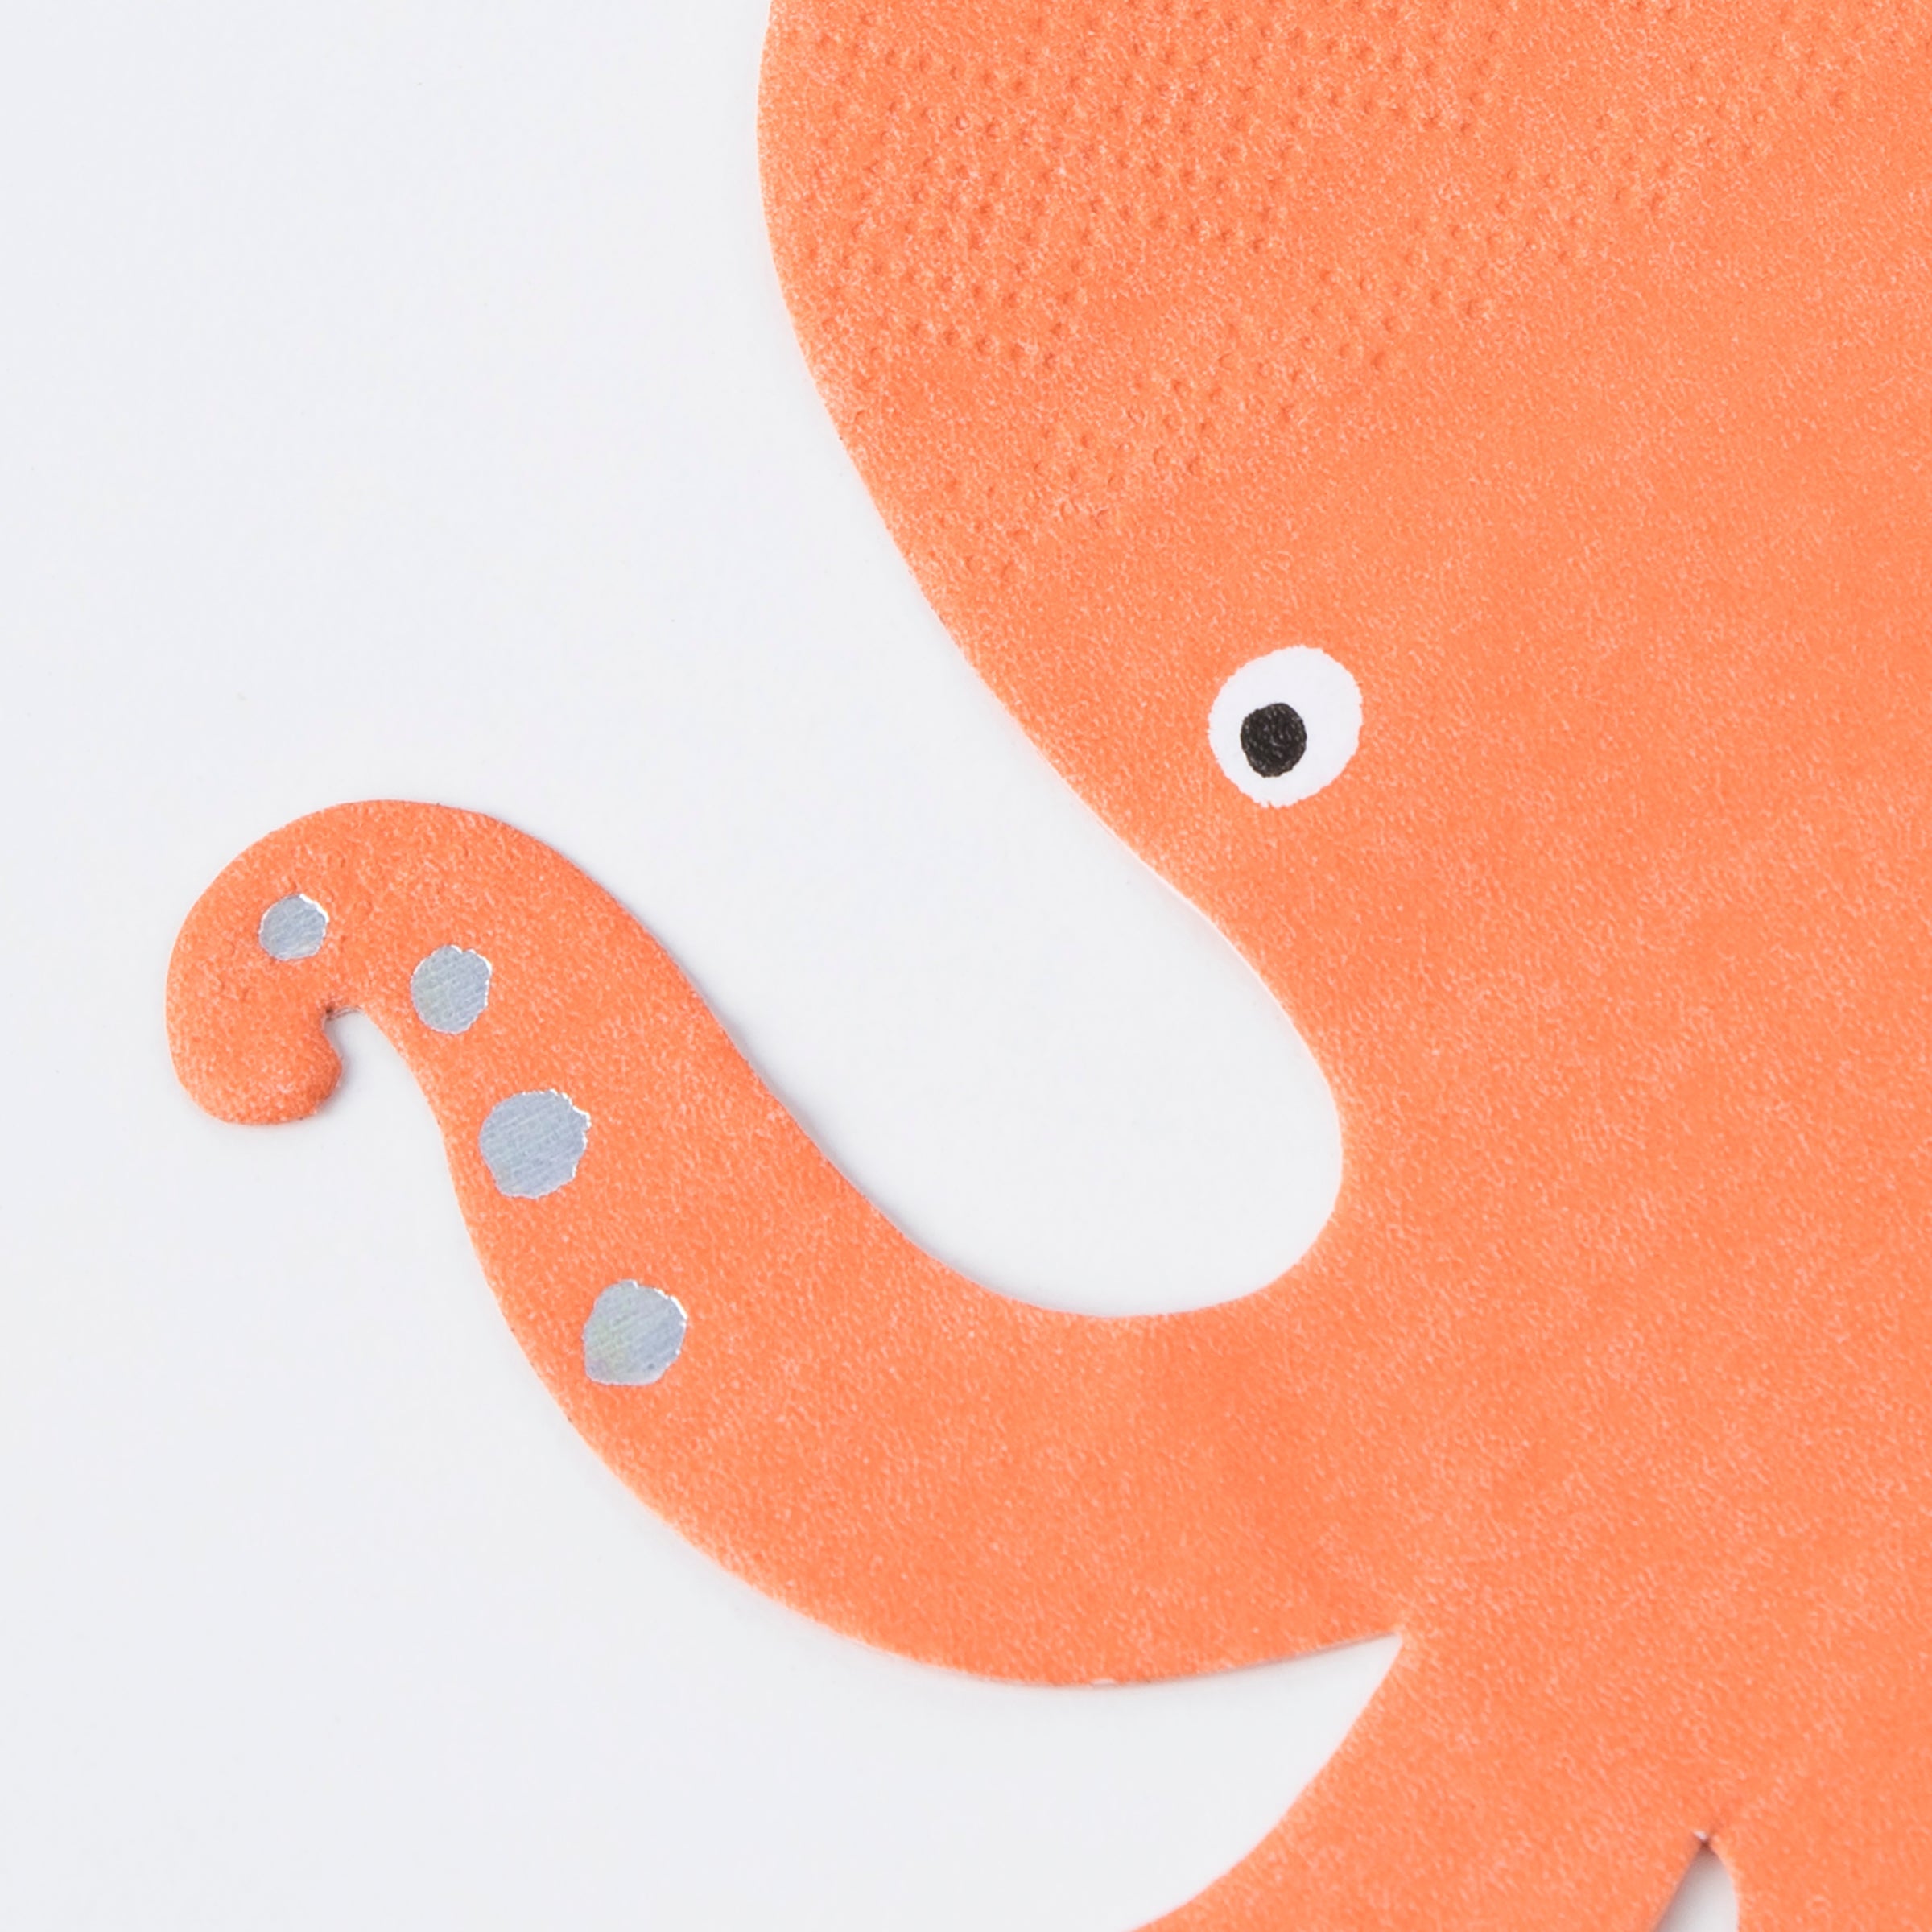 Our paper napkins are the perfect party napkins, featuring a delightful octopus.